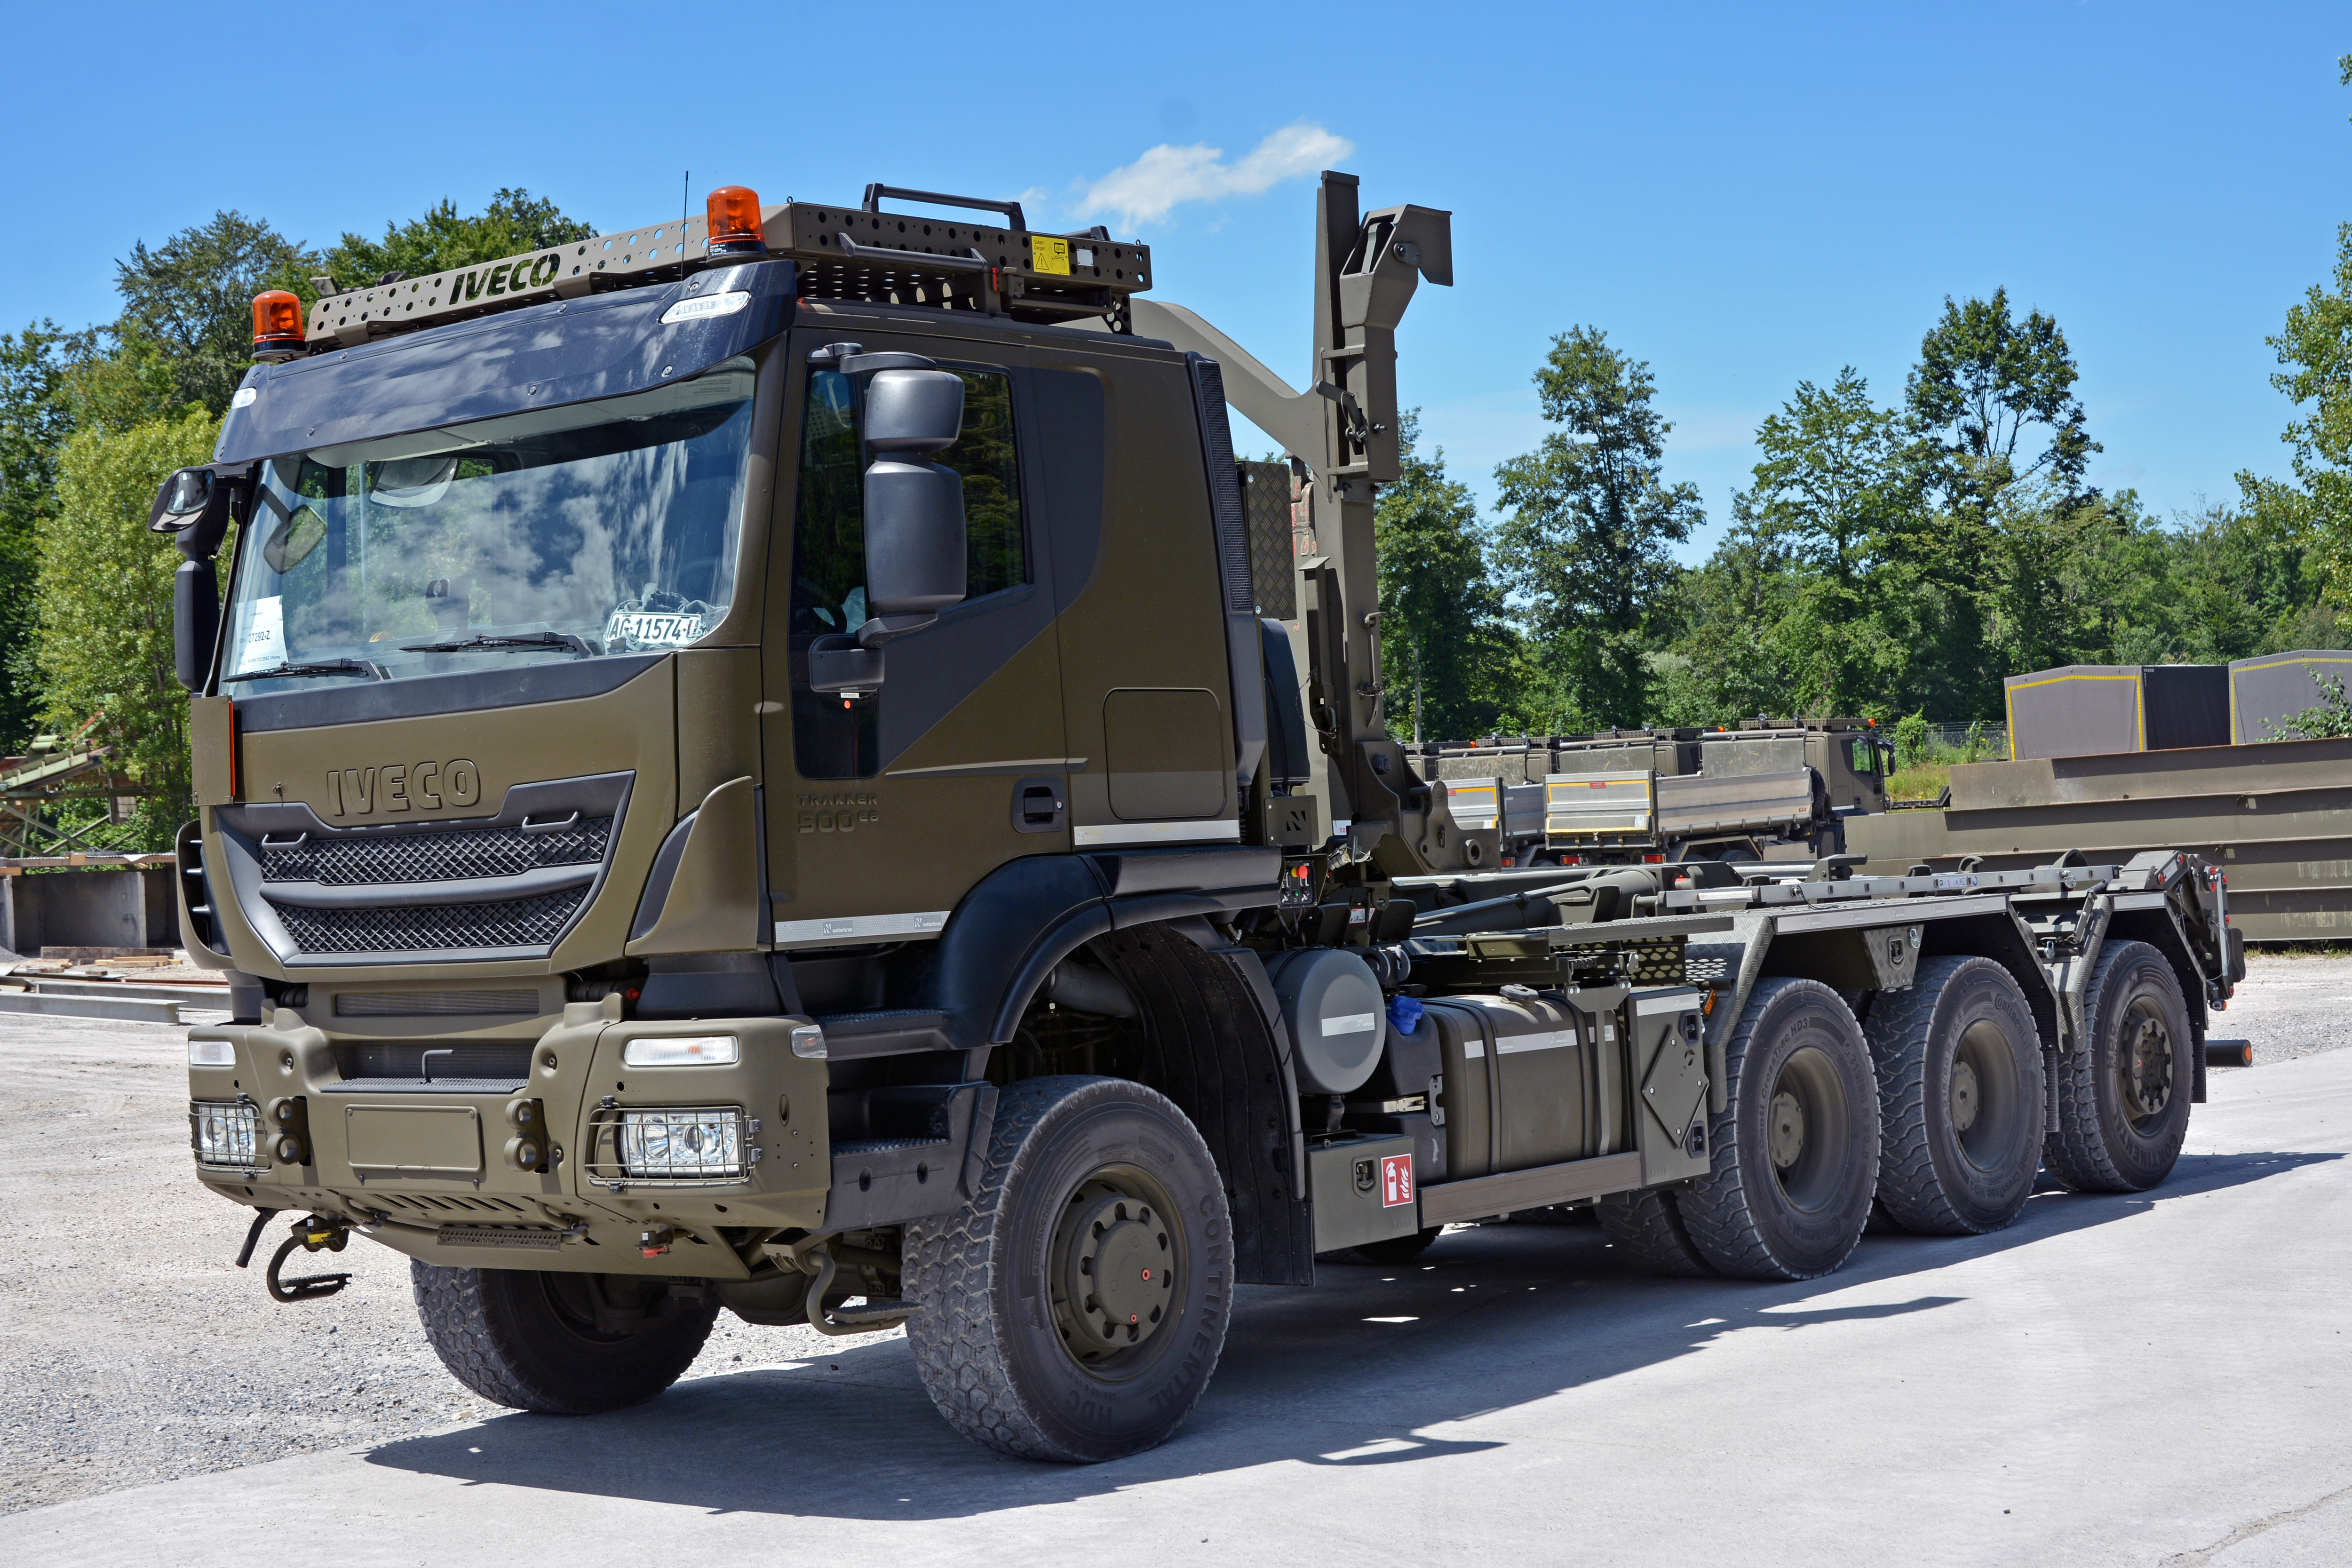 MULTILIFT ULT21Z.59+SC on IVECO truck front view